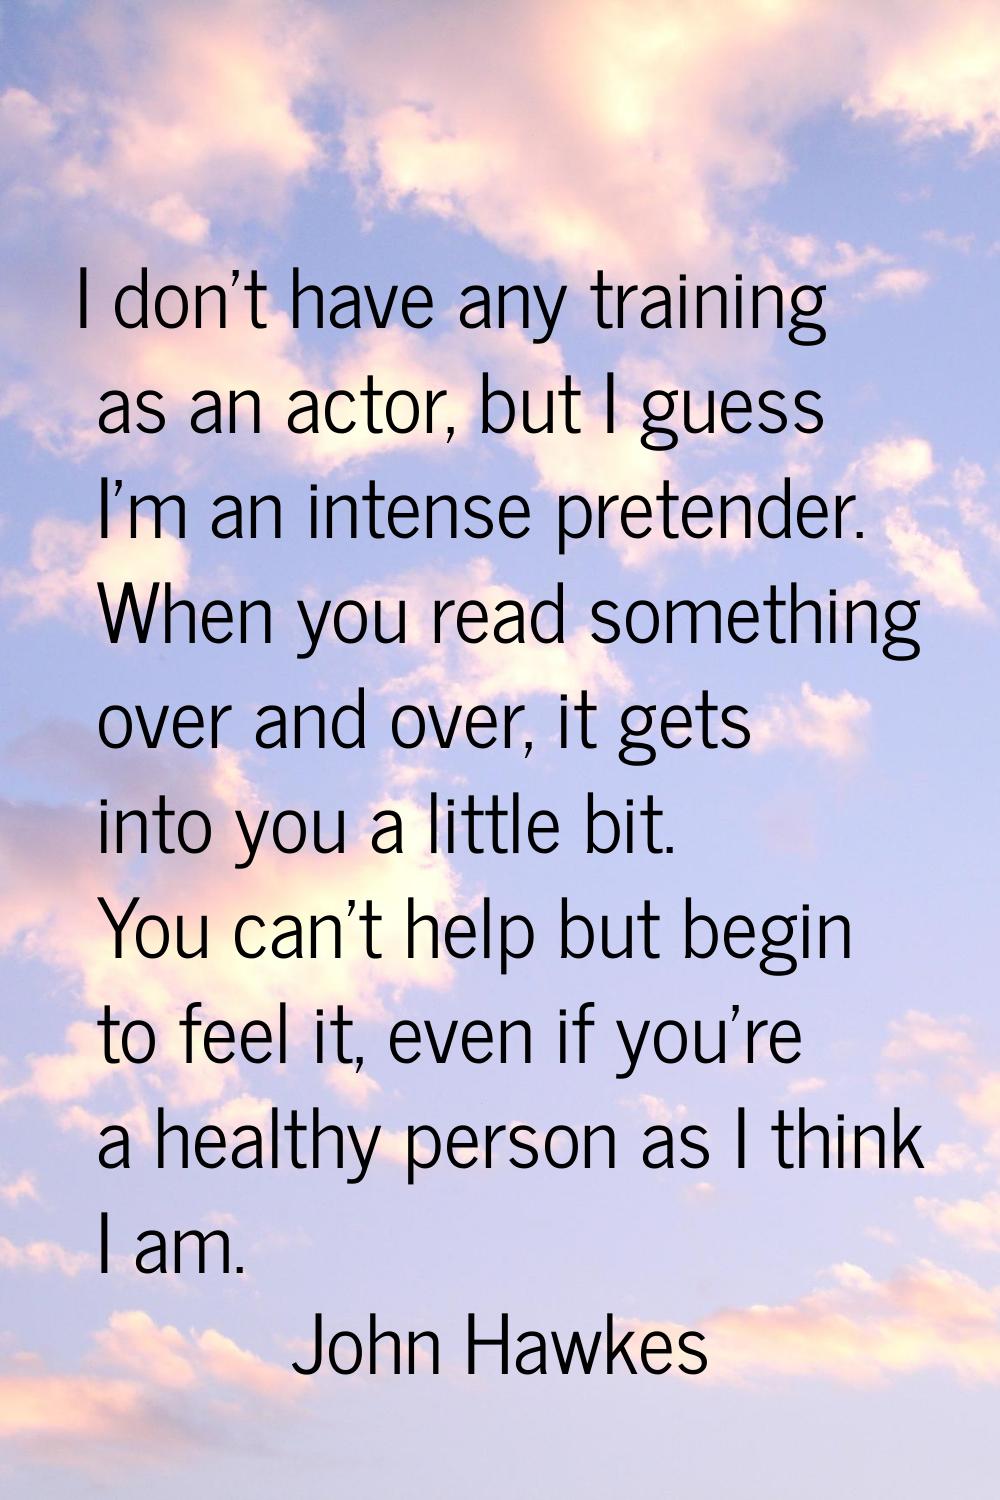 I don't have any training as an actor, but I guess I'm an intense pretender. When you read somethin